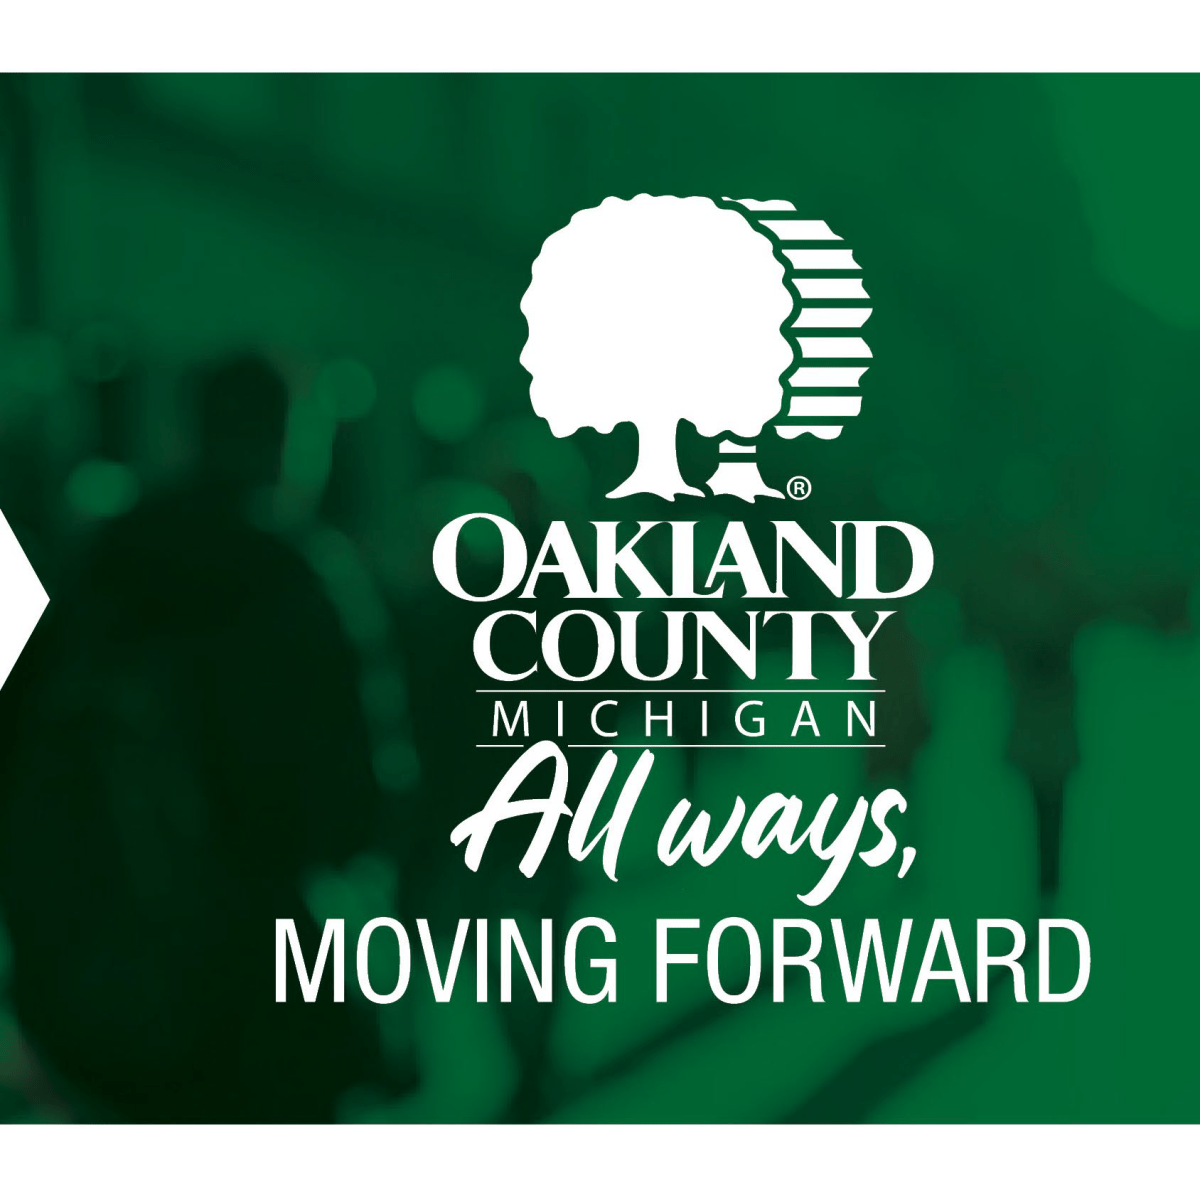 Graphic with Oakland County logo and "All ways, moving forward"